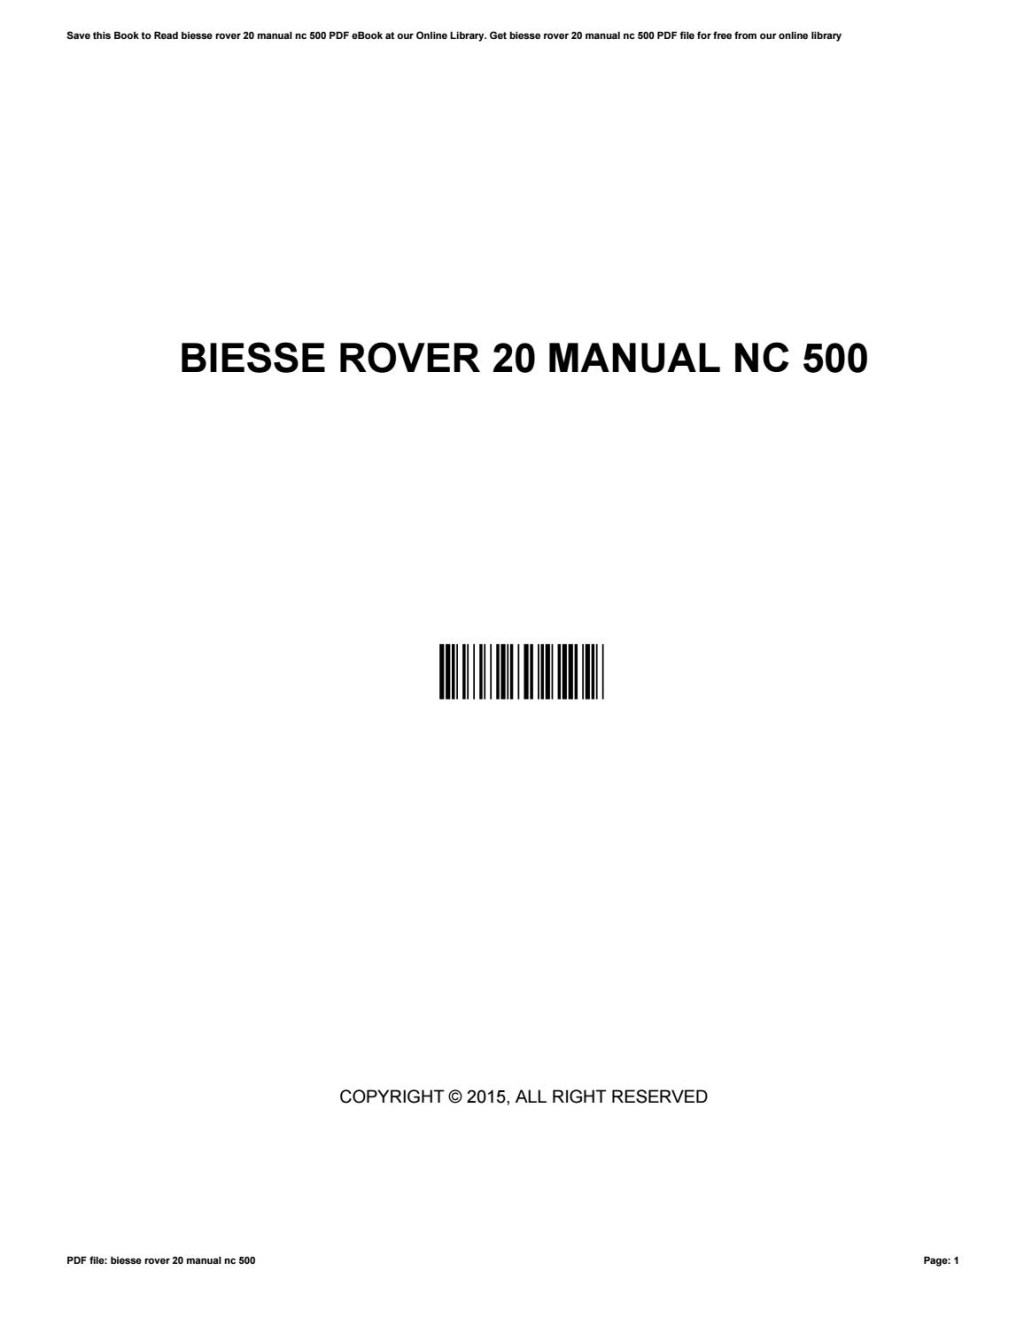 Picture of: Biesse rover  manual nc  by u – Issuu